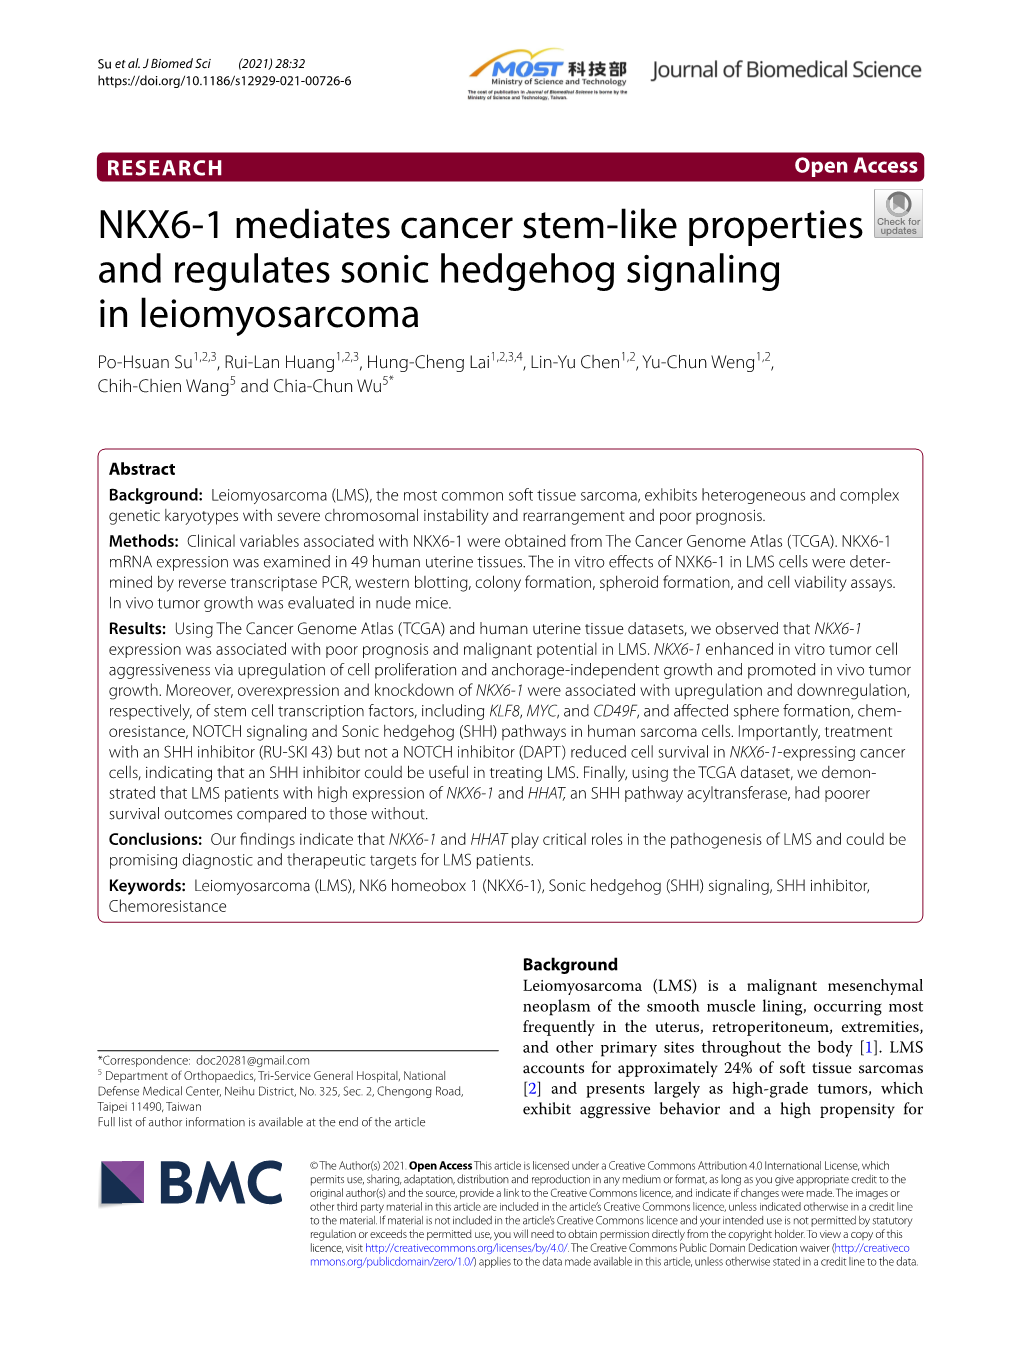 NKX6-1 Mediates Cancer Stem-Like Properties and Regulates Sonic Hedgehog Signaling in Leiomyosarcoma